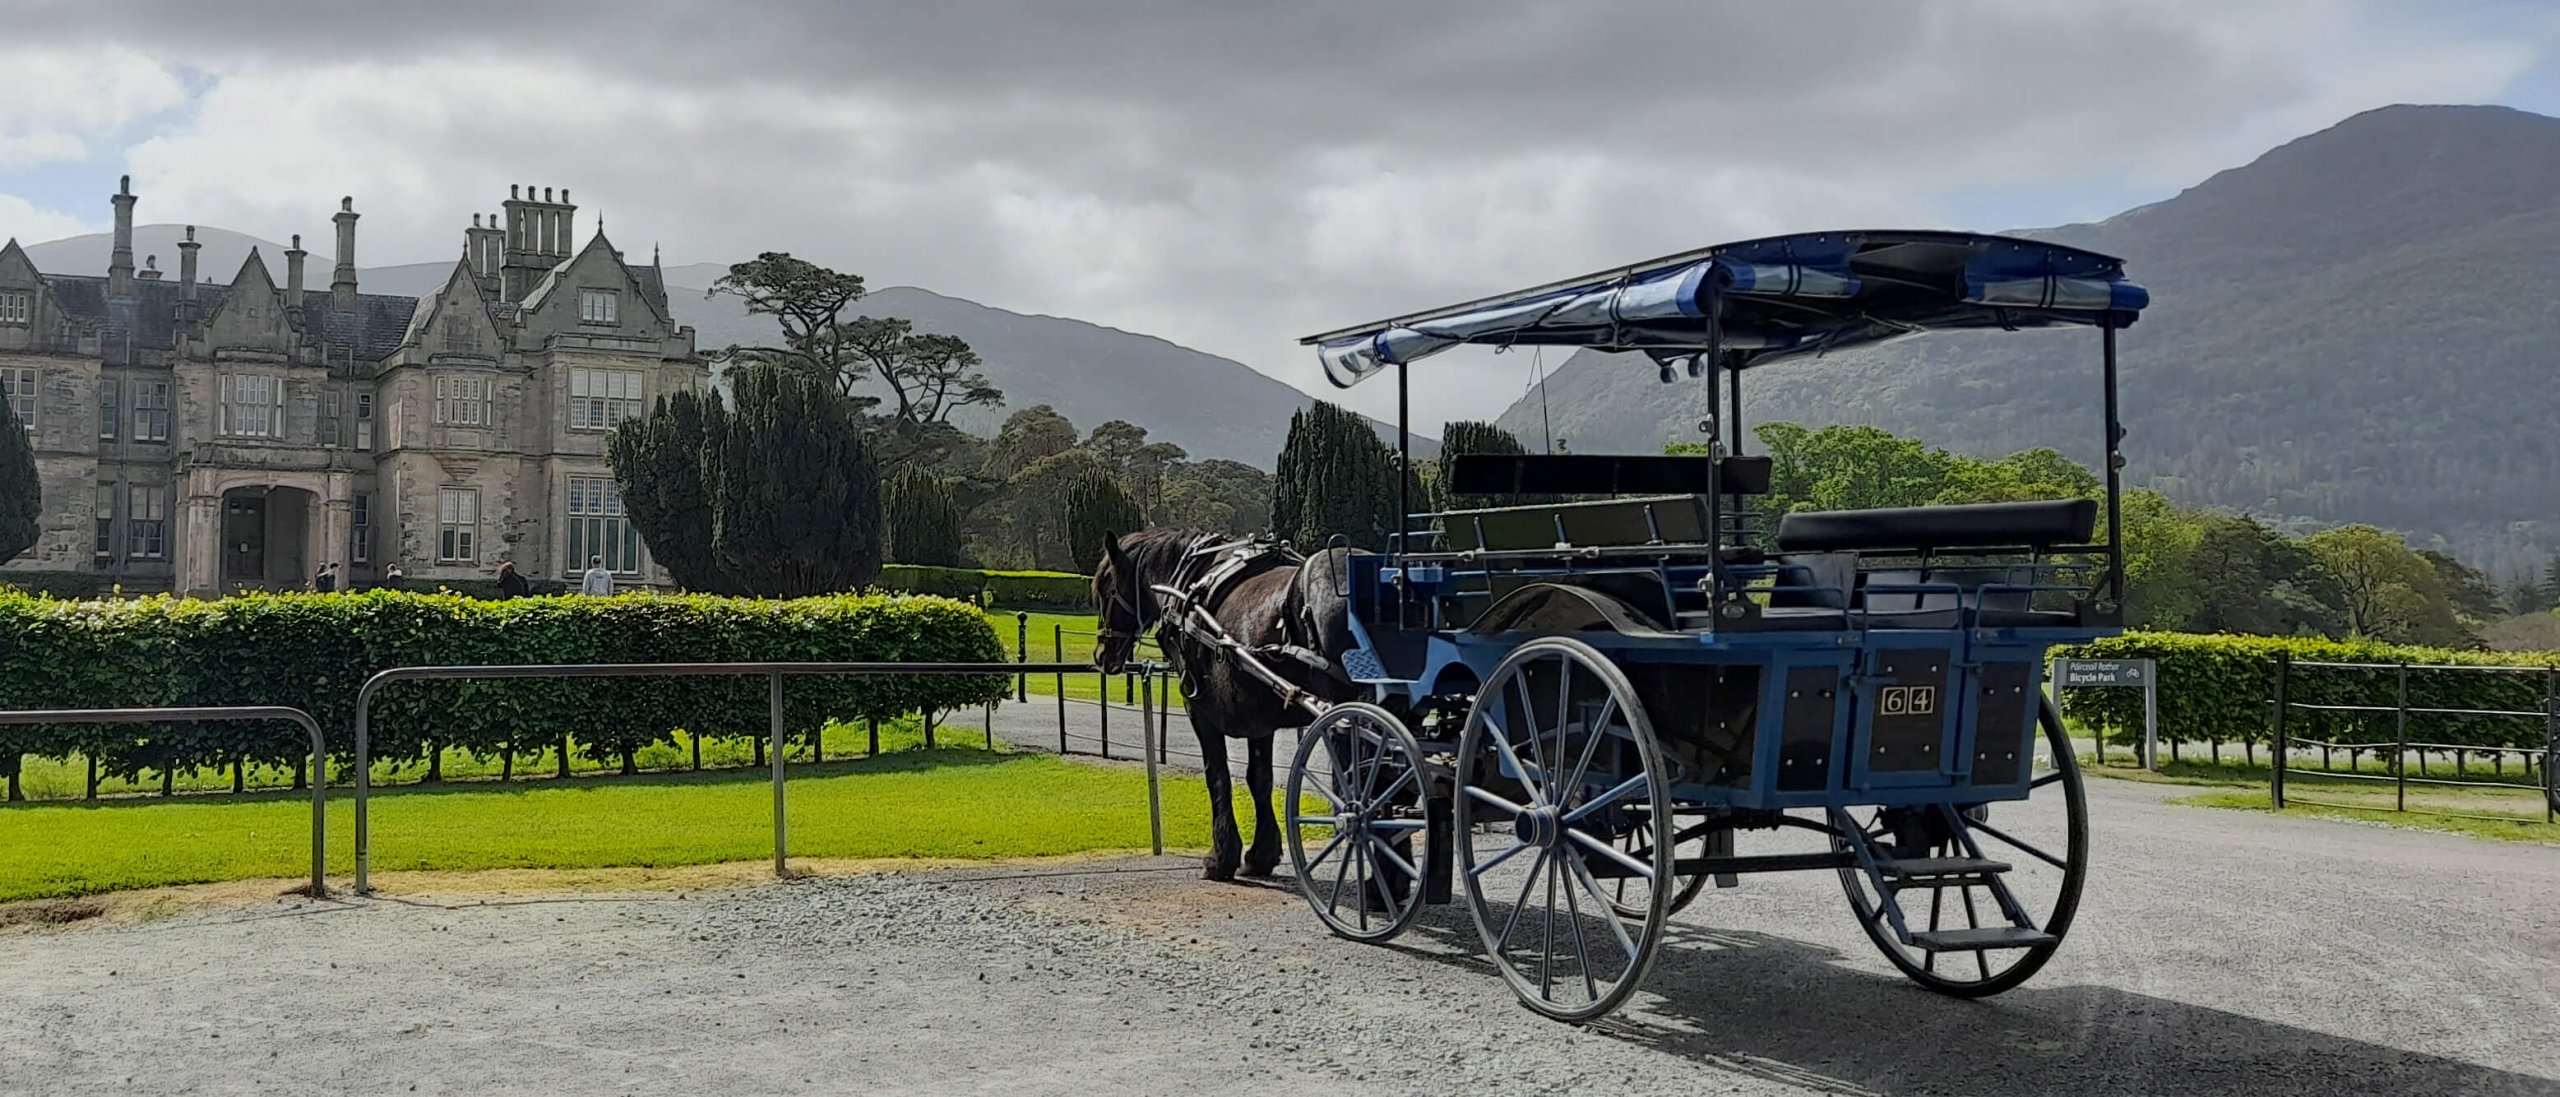 Killarney horse and carriage  on a tour of the Wild Atlantic Way in Ireland